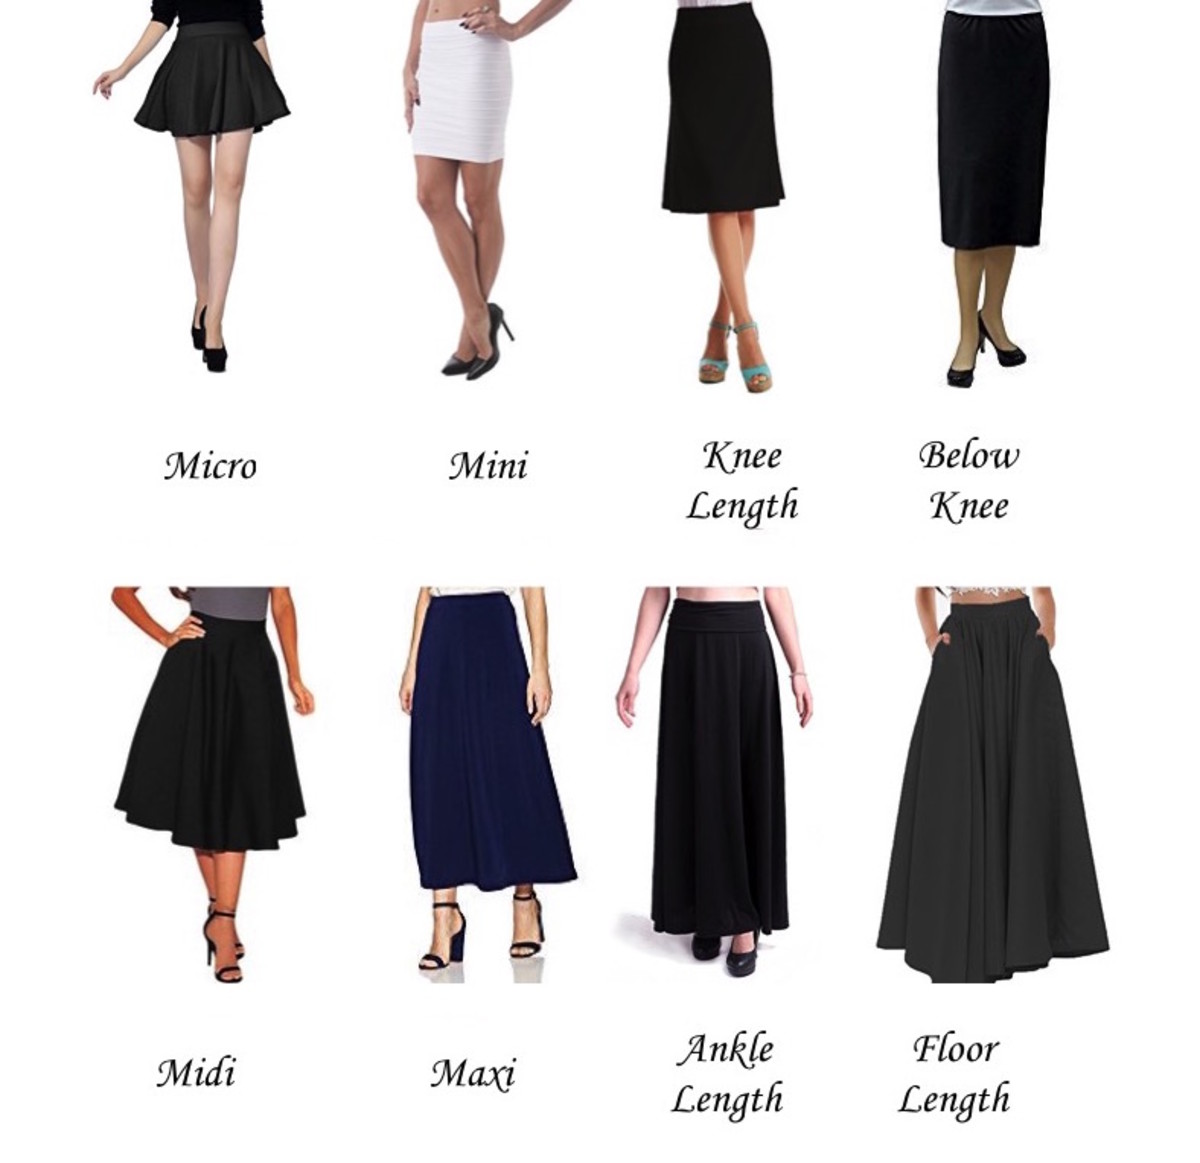 AZ List of Types and Silhouettes of Skirts in Fashion HubPages